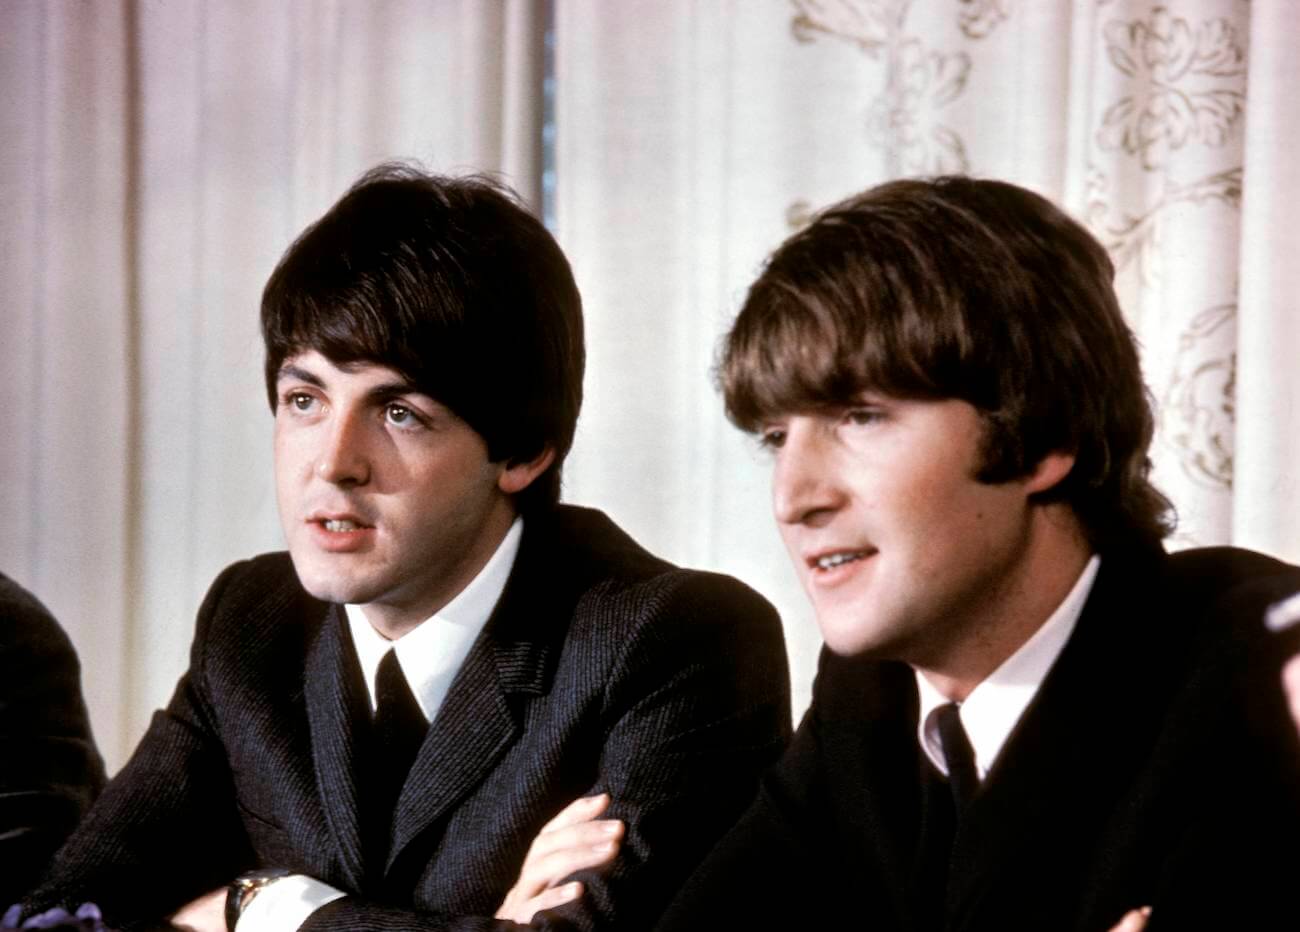 Paul McCartney and John Lennon at a press conference in 1964.